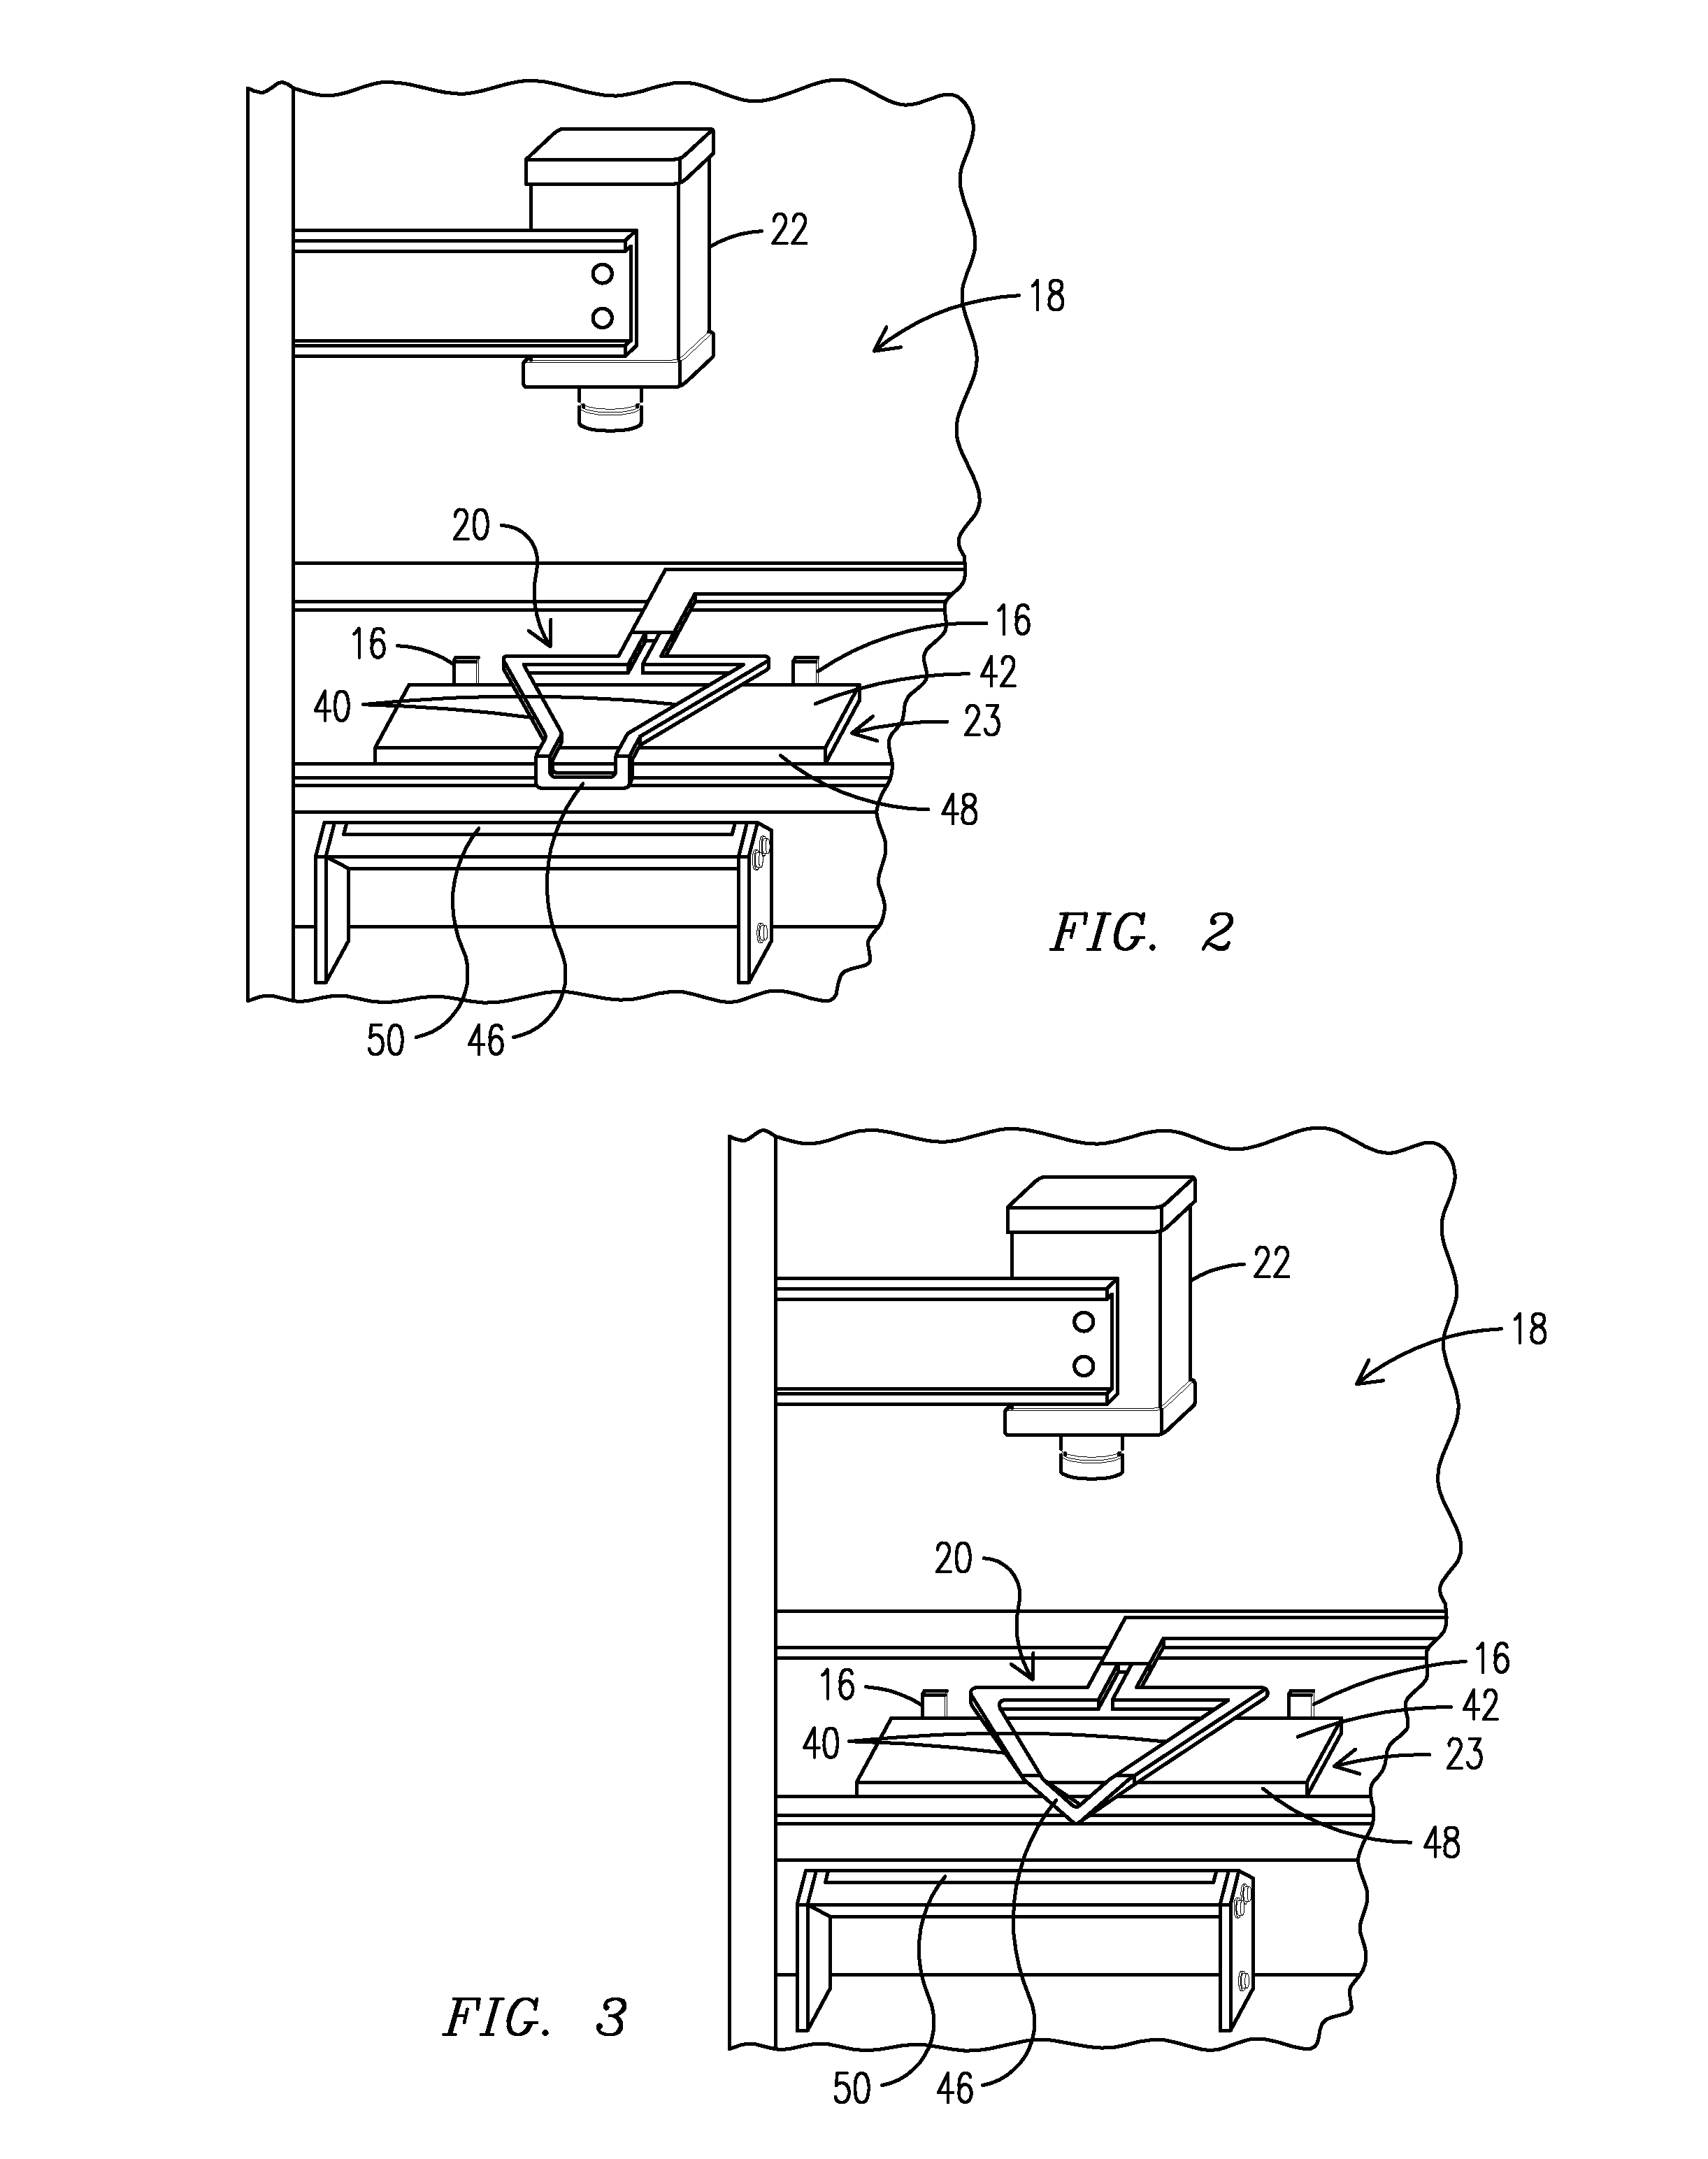 Automated Inspection System and Method for Nondestructive Inspection of a Workpiece Using Induction Thermography